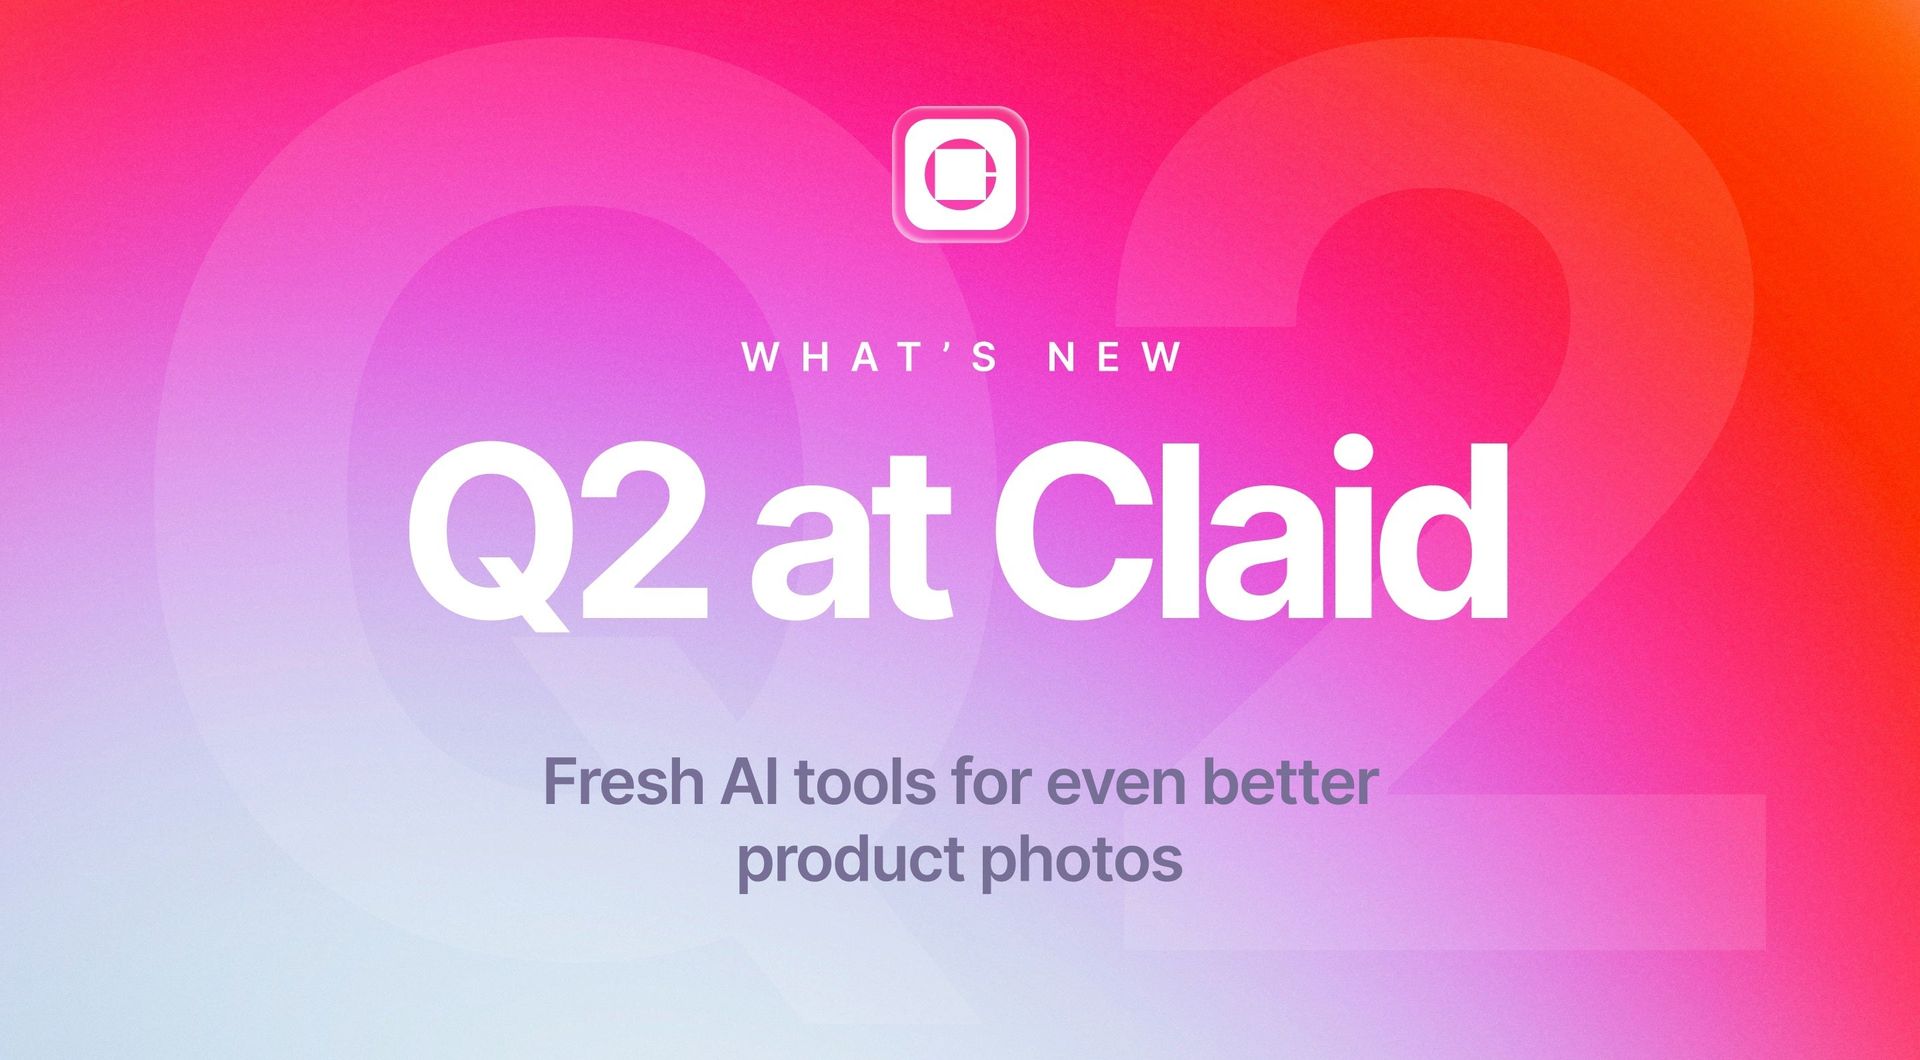 Picture for Claid Q2 update: New features to make your product photos look amazing article